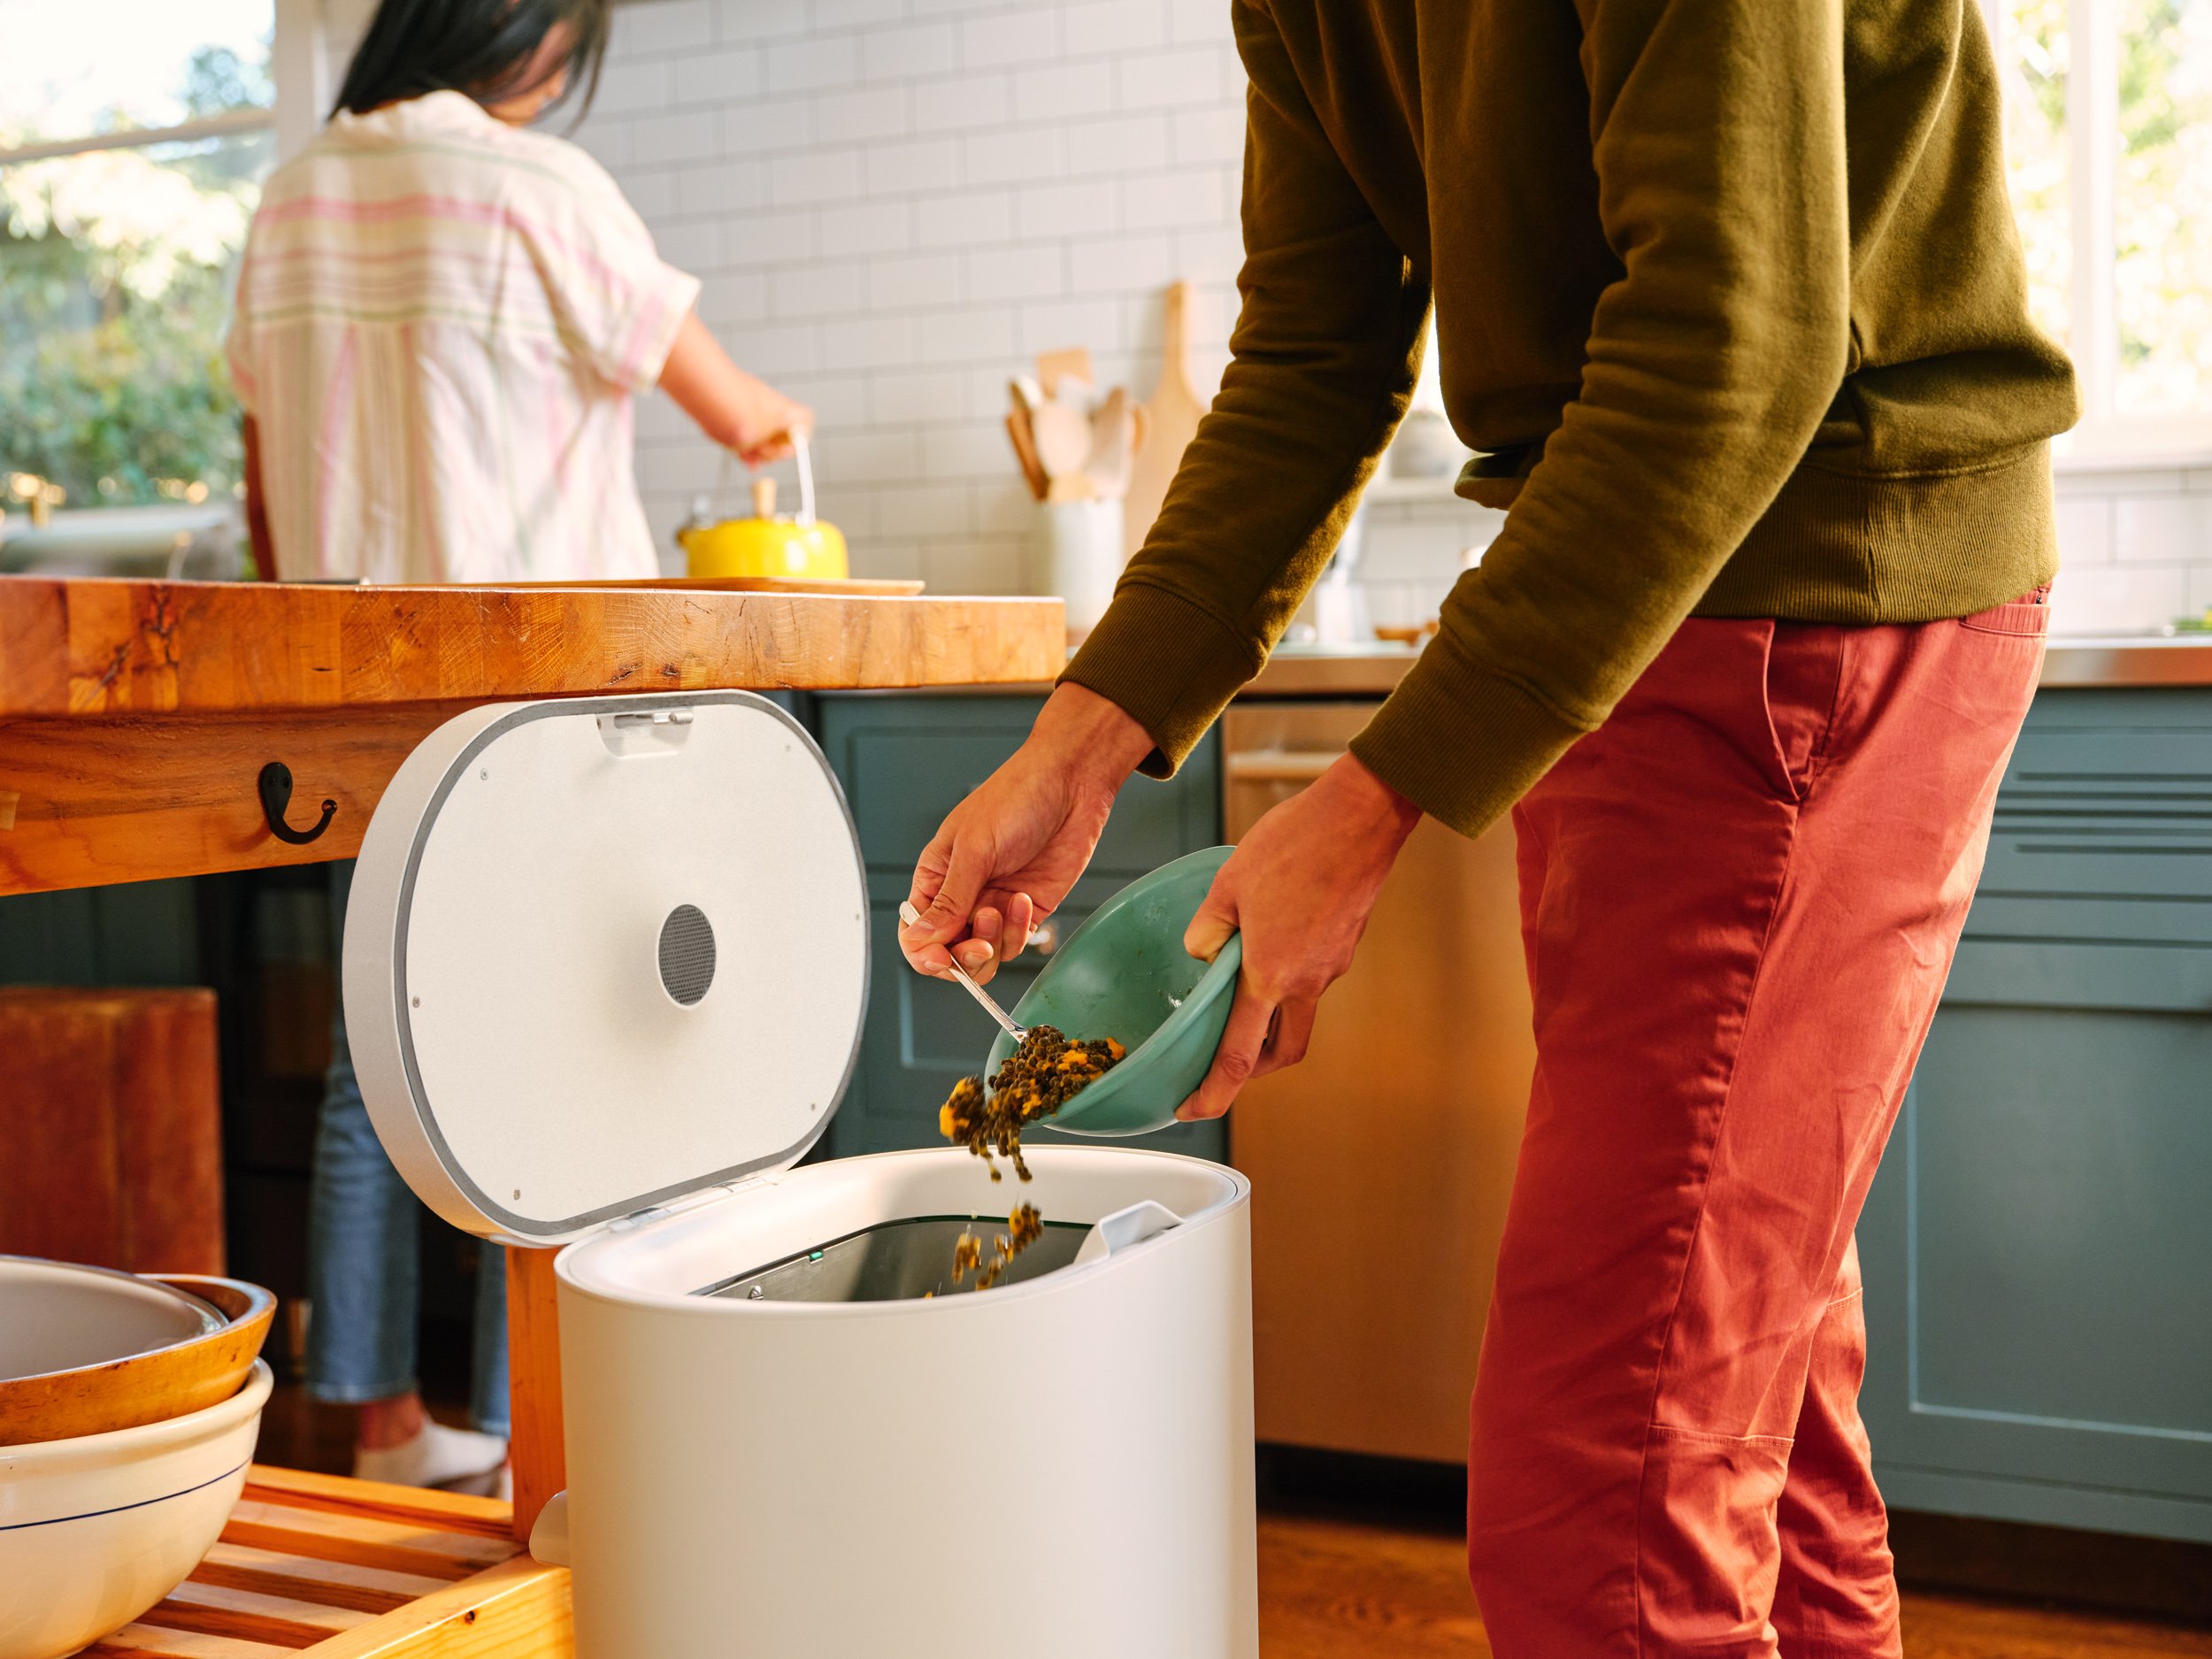 The Smartest and Cleanest Way to Deal With Food Scraps? Mill